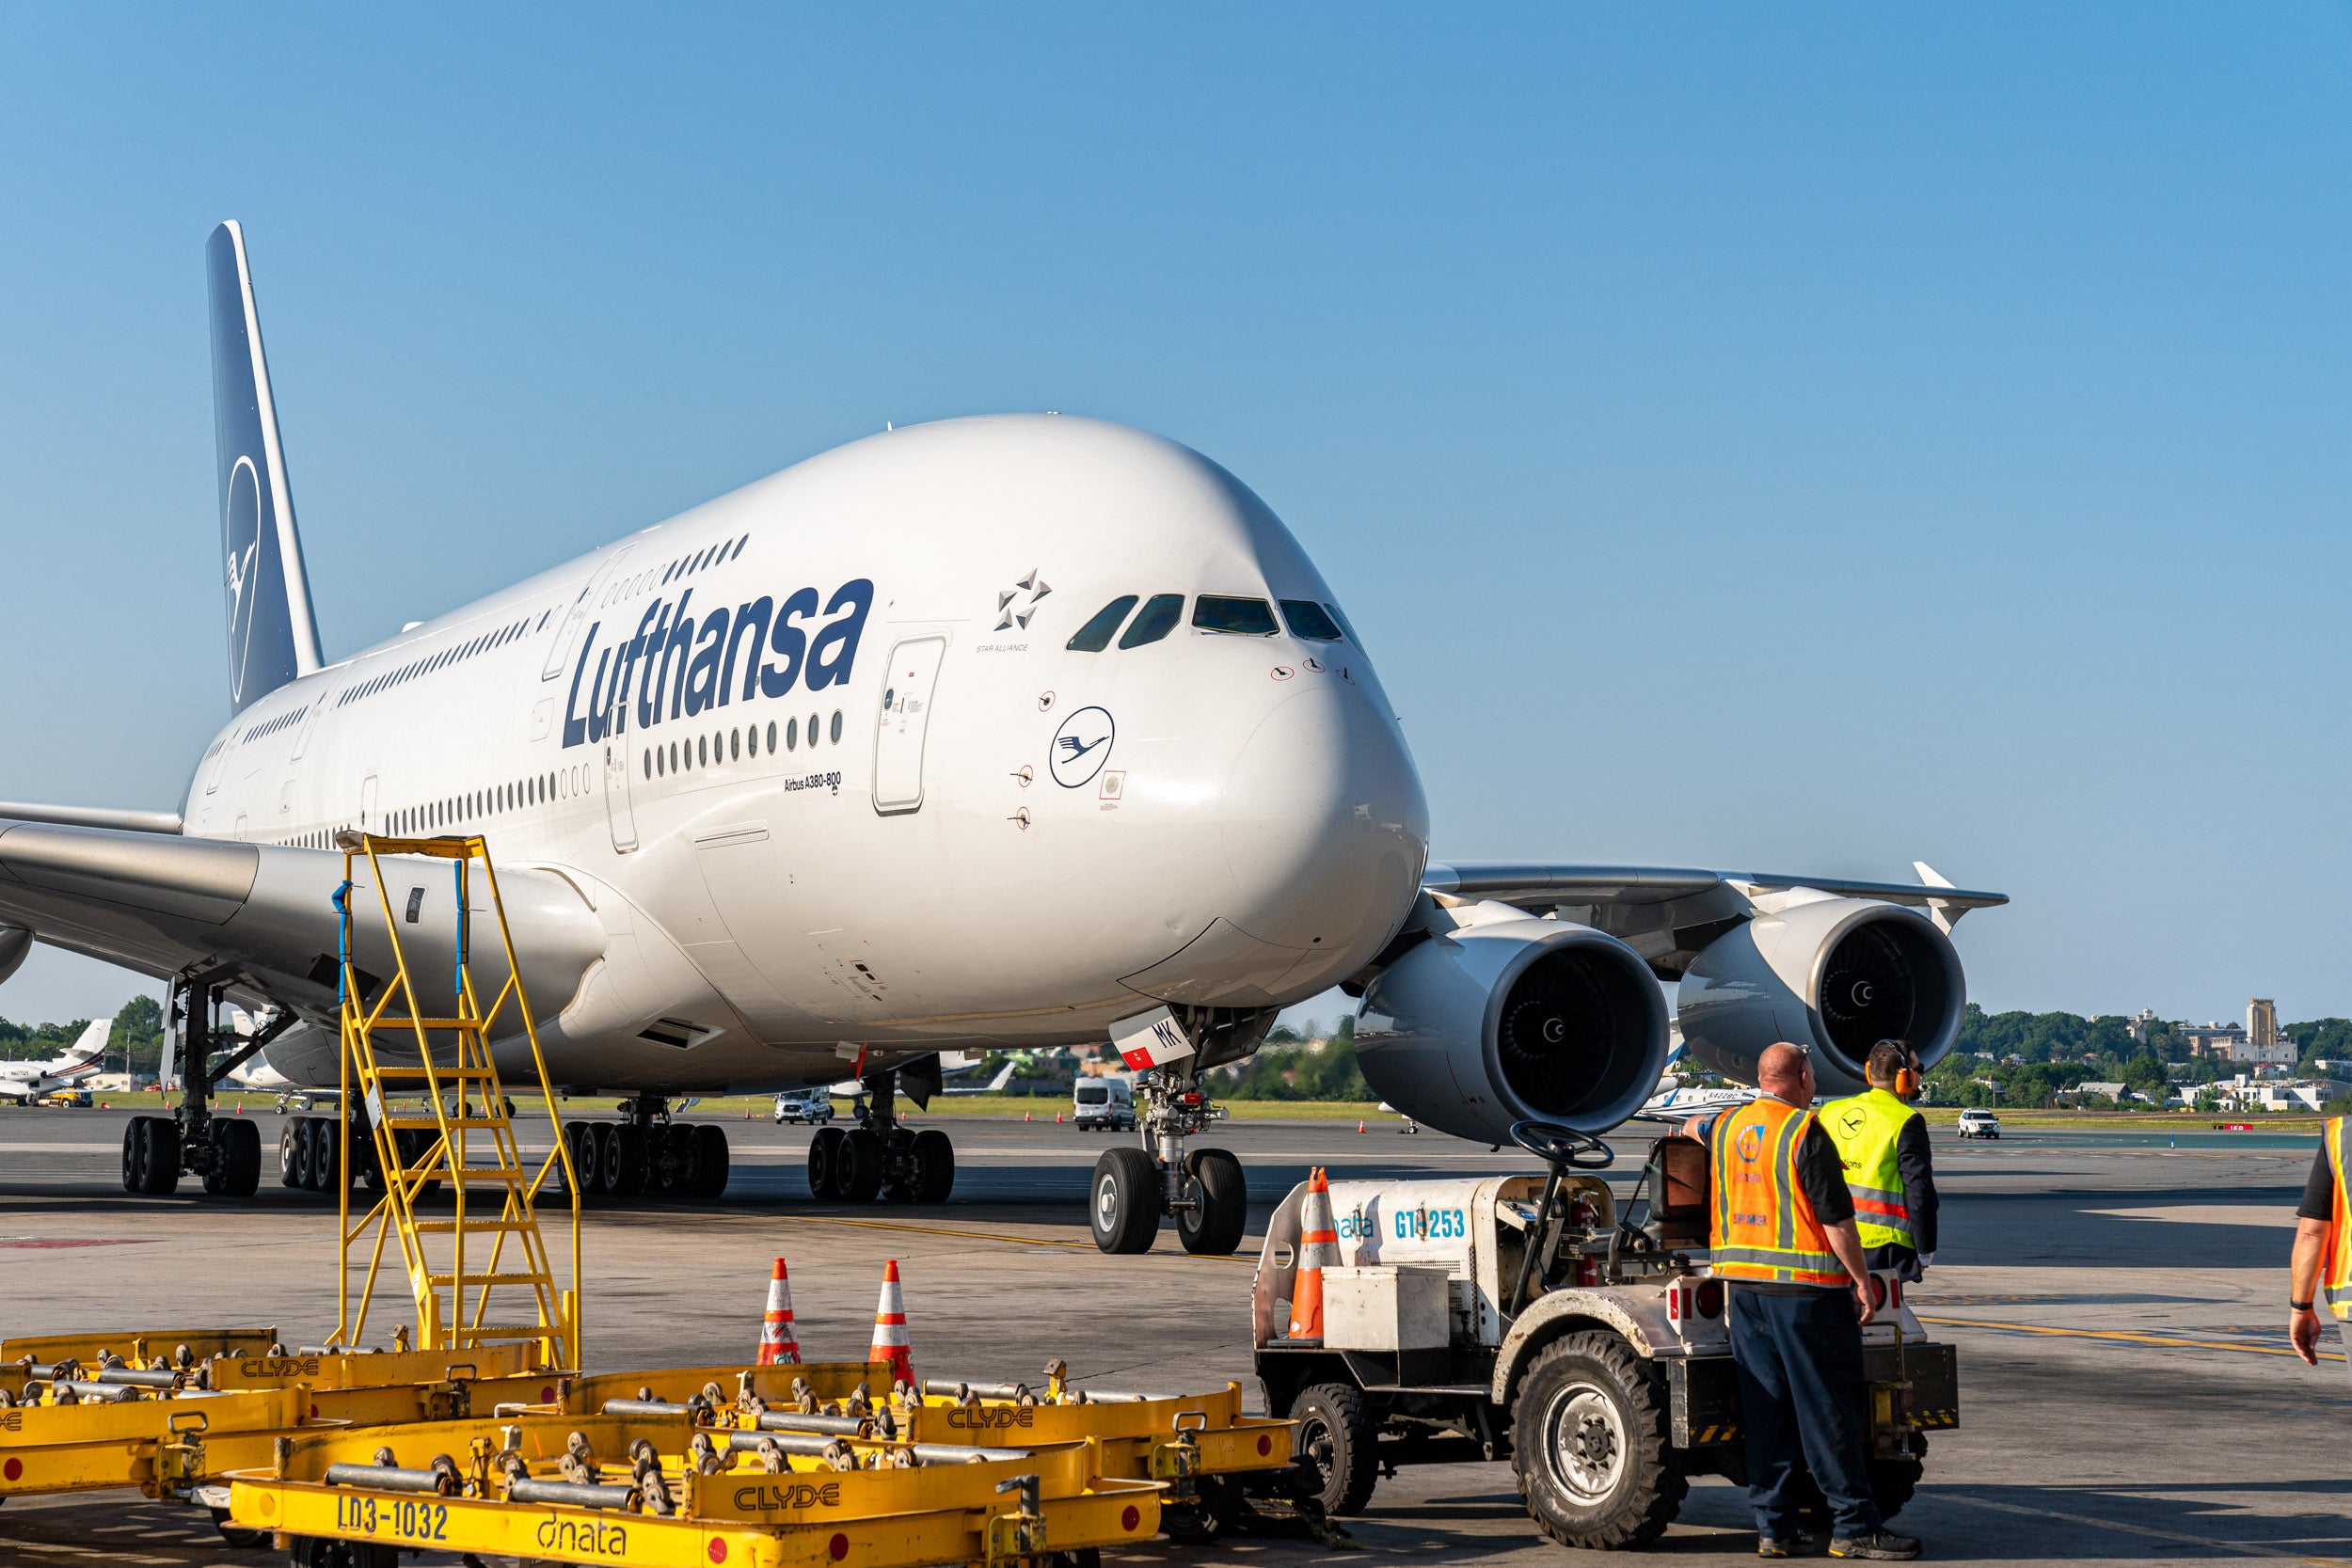 Lufthansa’s ‘retired’ A380 returns — see photos of its arrival in Boston